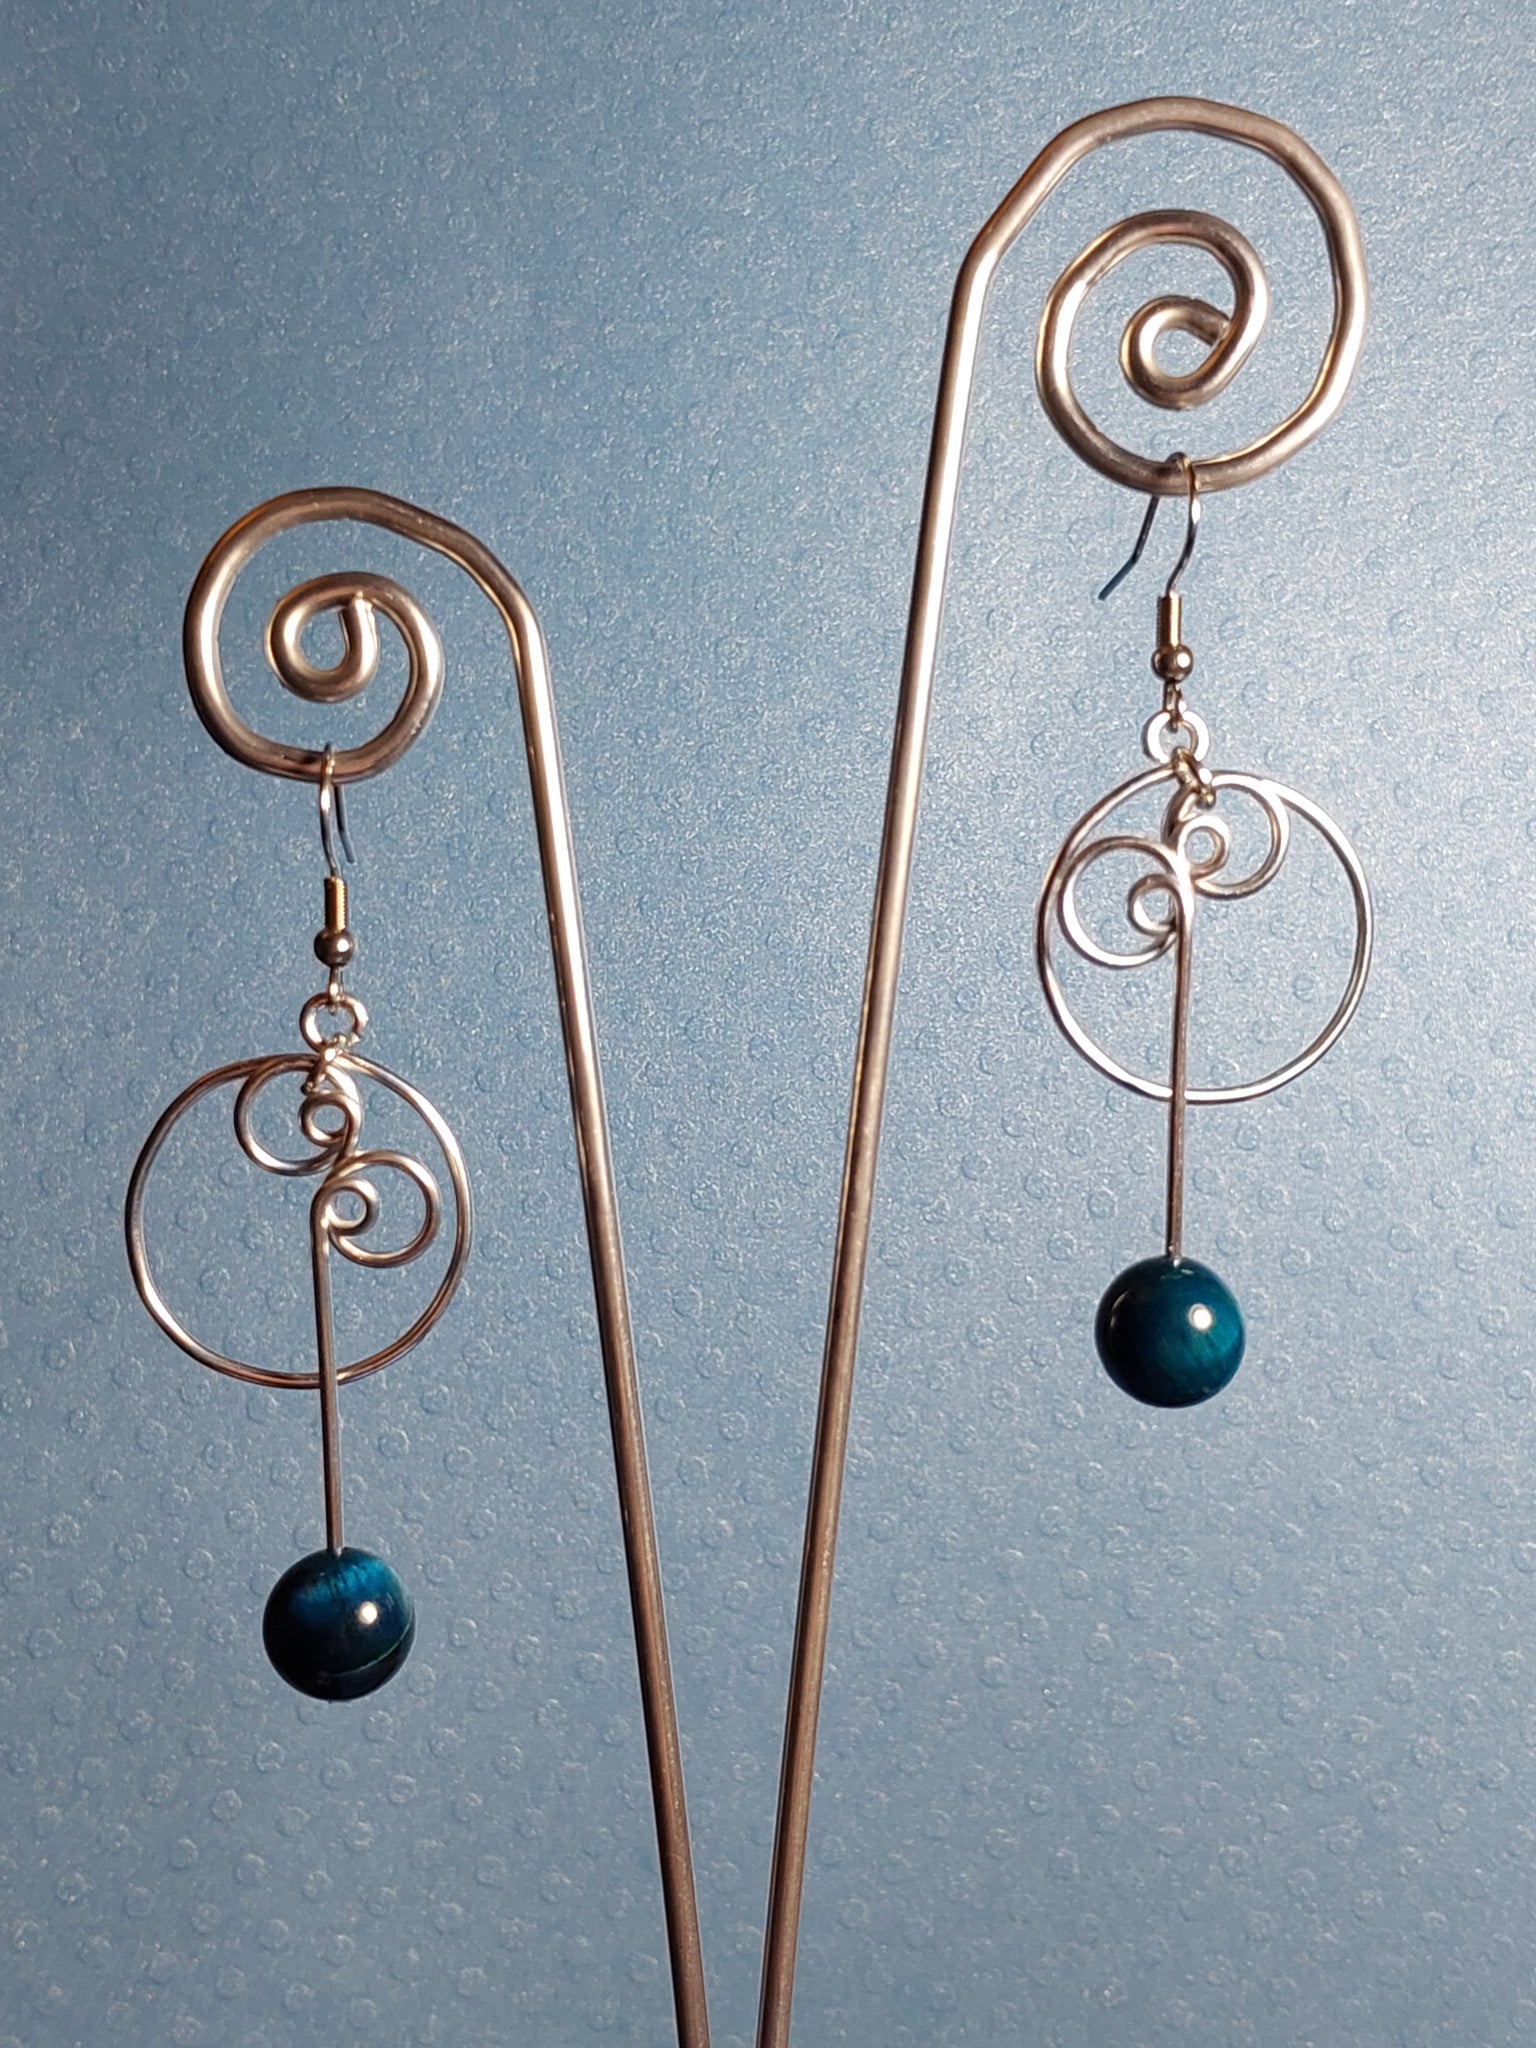 Handcrafted Aluminum Wire Earrings with Blue Tigers Eye Beads